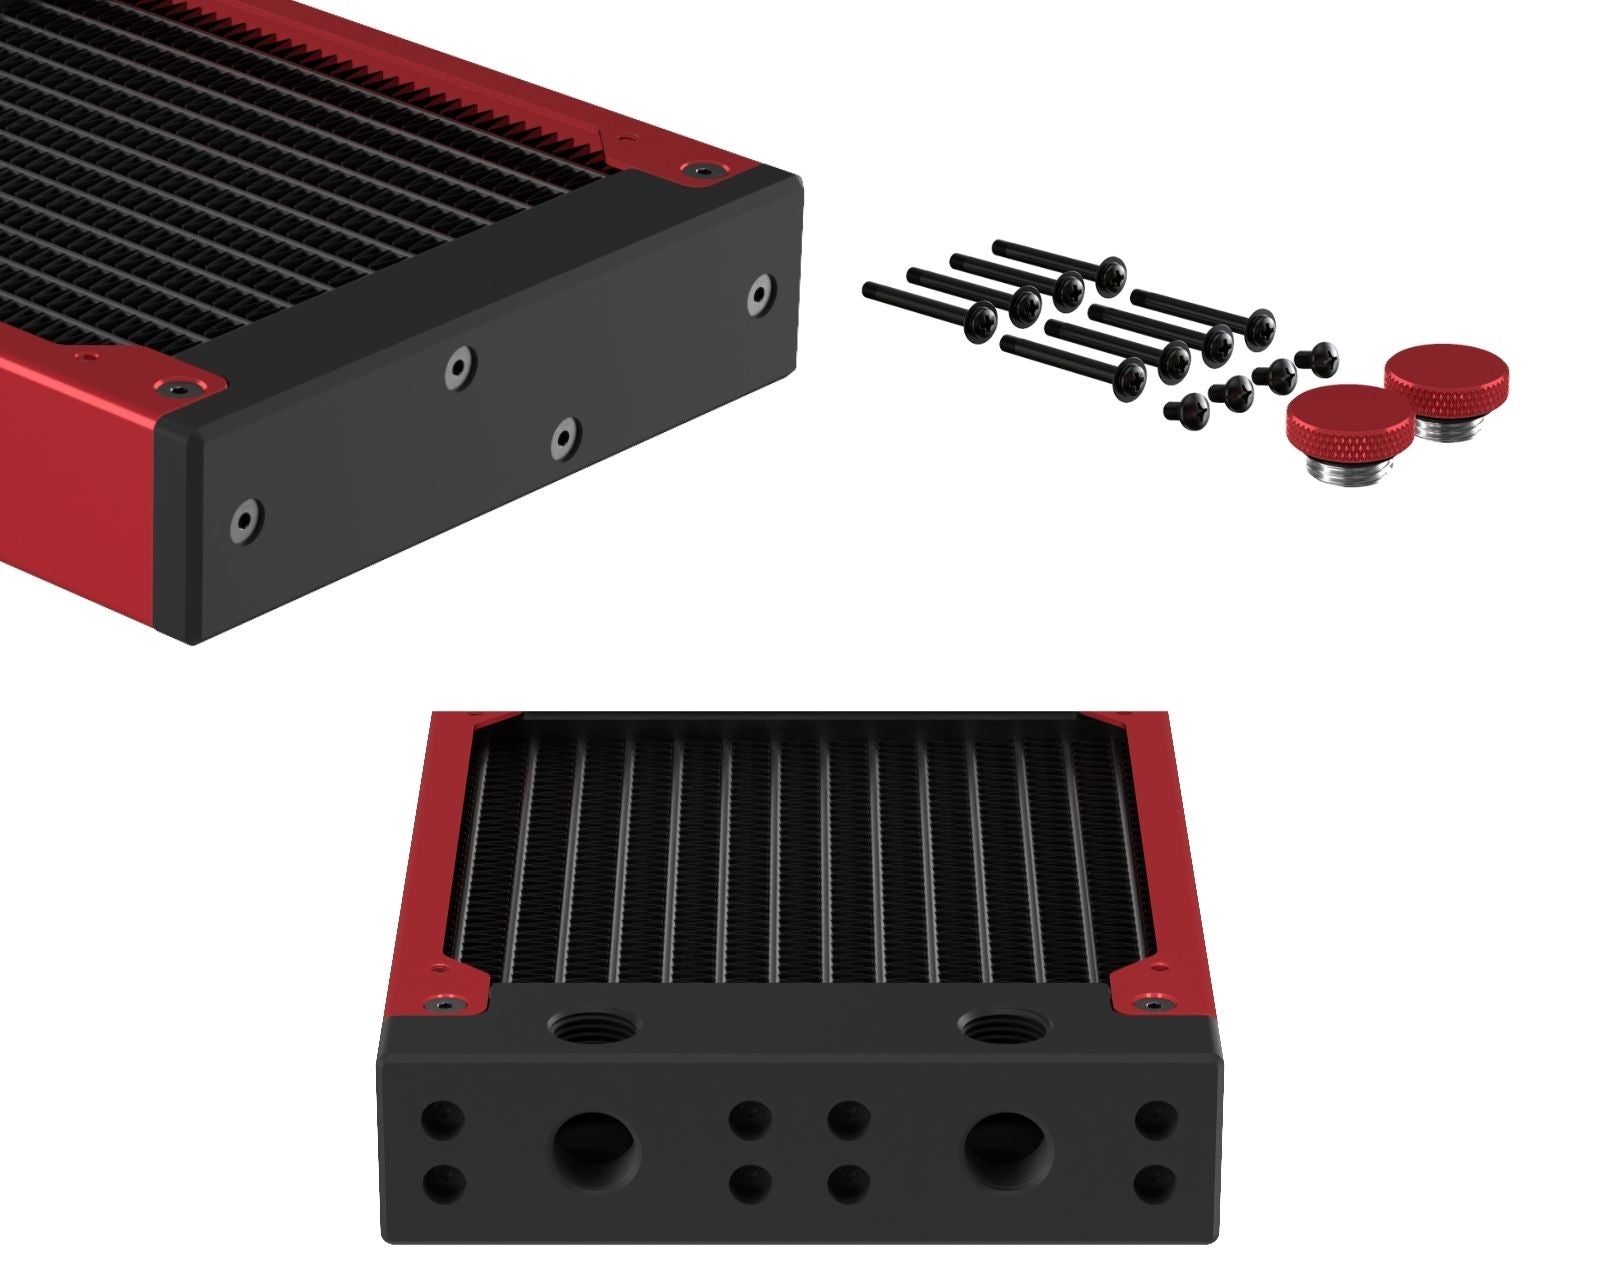 PrimoChill 240SL (30mm) EXIMO Modular Radiator, Black POM, 2x120mm, Dual Fan (R-SL-BK24) Available in 20+ Colors, Assembled in USA and Custom Watercooling Loop Ready - Candy Red